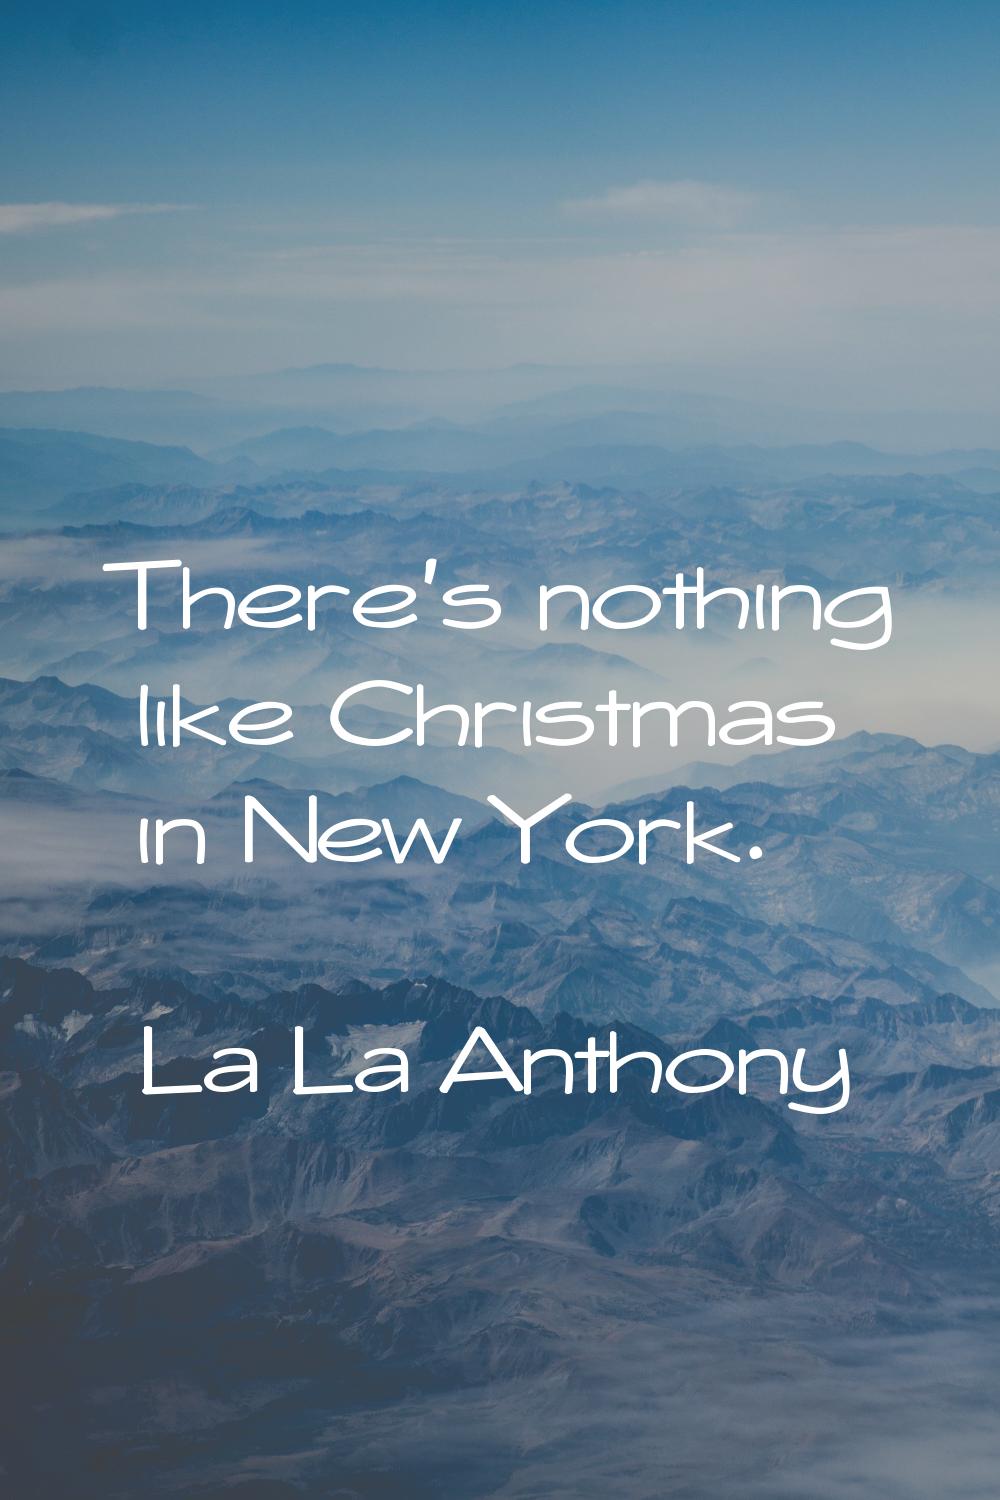 There's nothing like Christmas in New York.